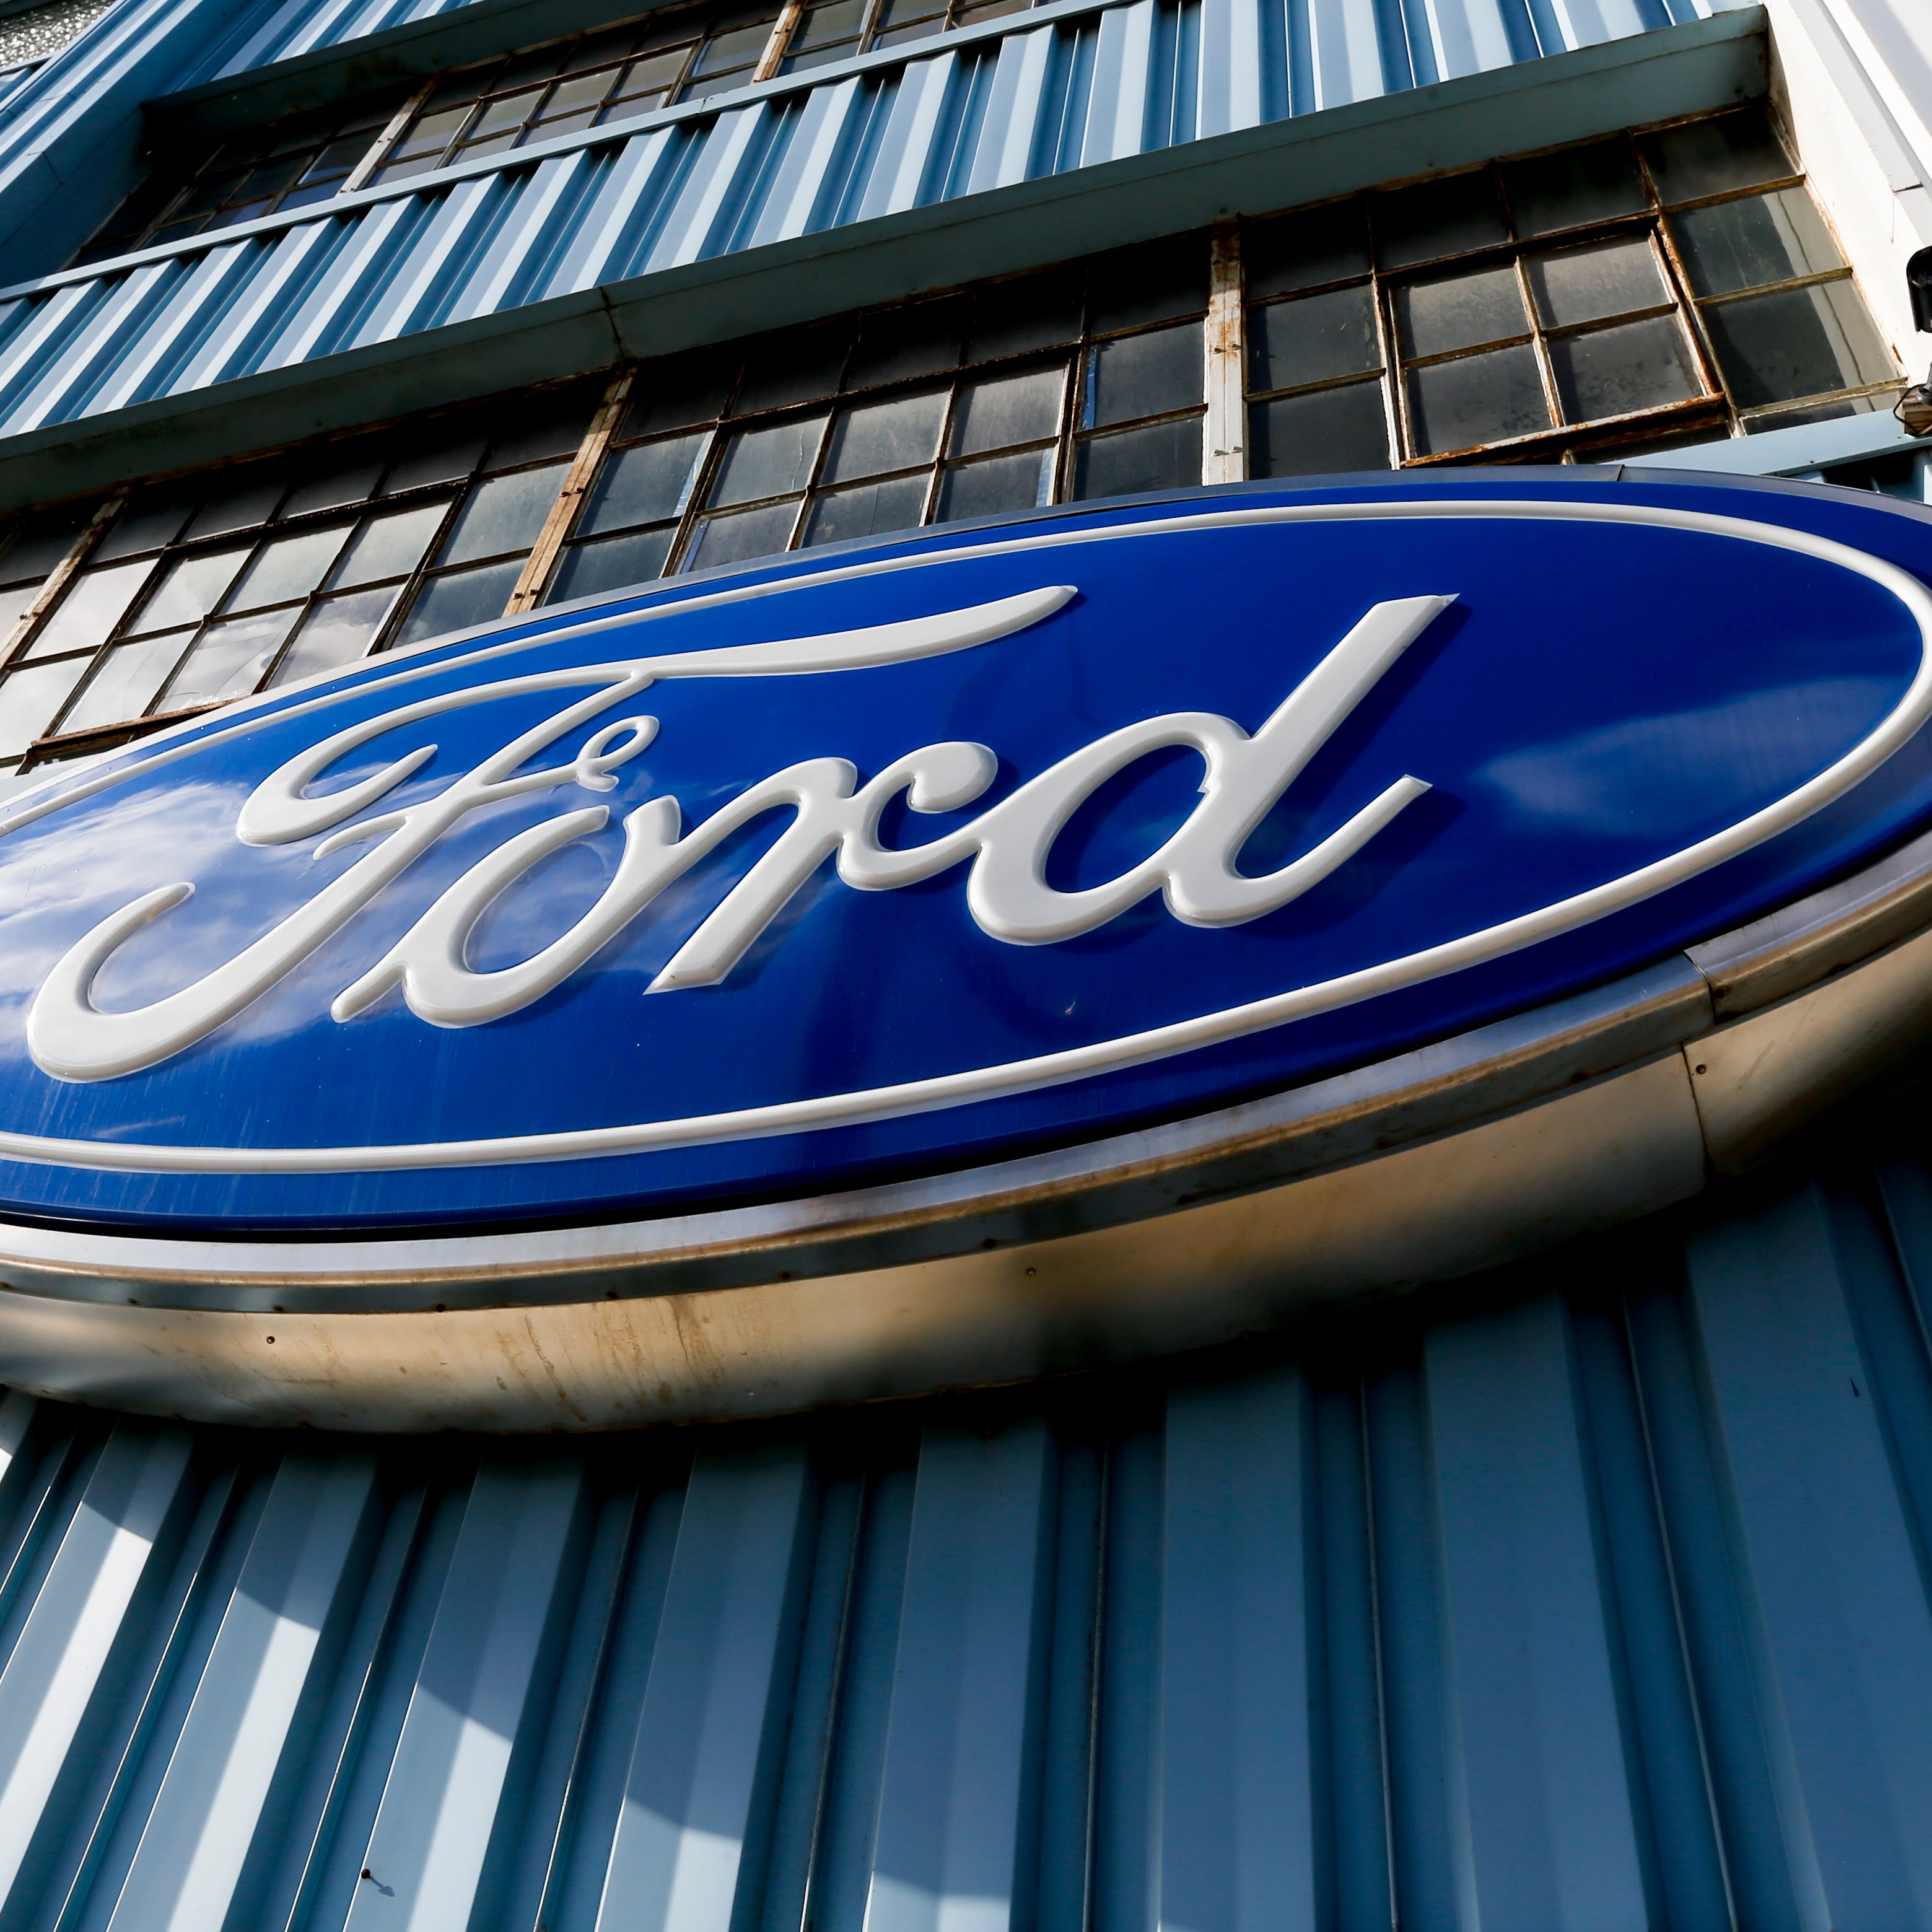 This Thursday, Nov. 19, 2015, photo, shows a blue oval Ford sign above the entrance to Butler County Ford in Butler, Pa. Ford announced Tuesday, Jan. 26, 2016, that the company is recalling nearly 391,000 Ranger pickups because the driver's air bag inflators can explode with too much force and cause injuries. The recall covers trucks from 2004 through 2006 in the U.S. and Canada. (AP Photo/Keith Srakocic) ORG XMIT: NYBZ214